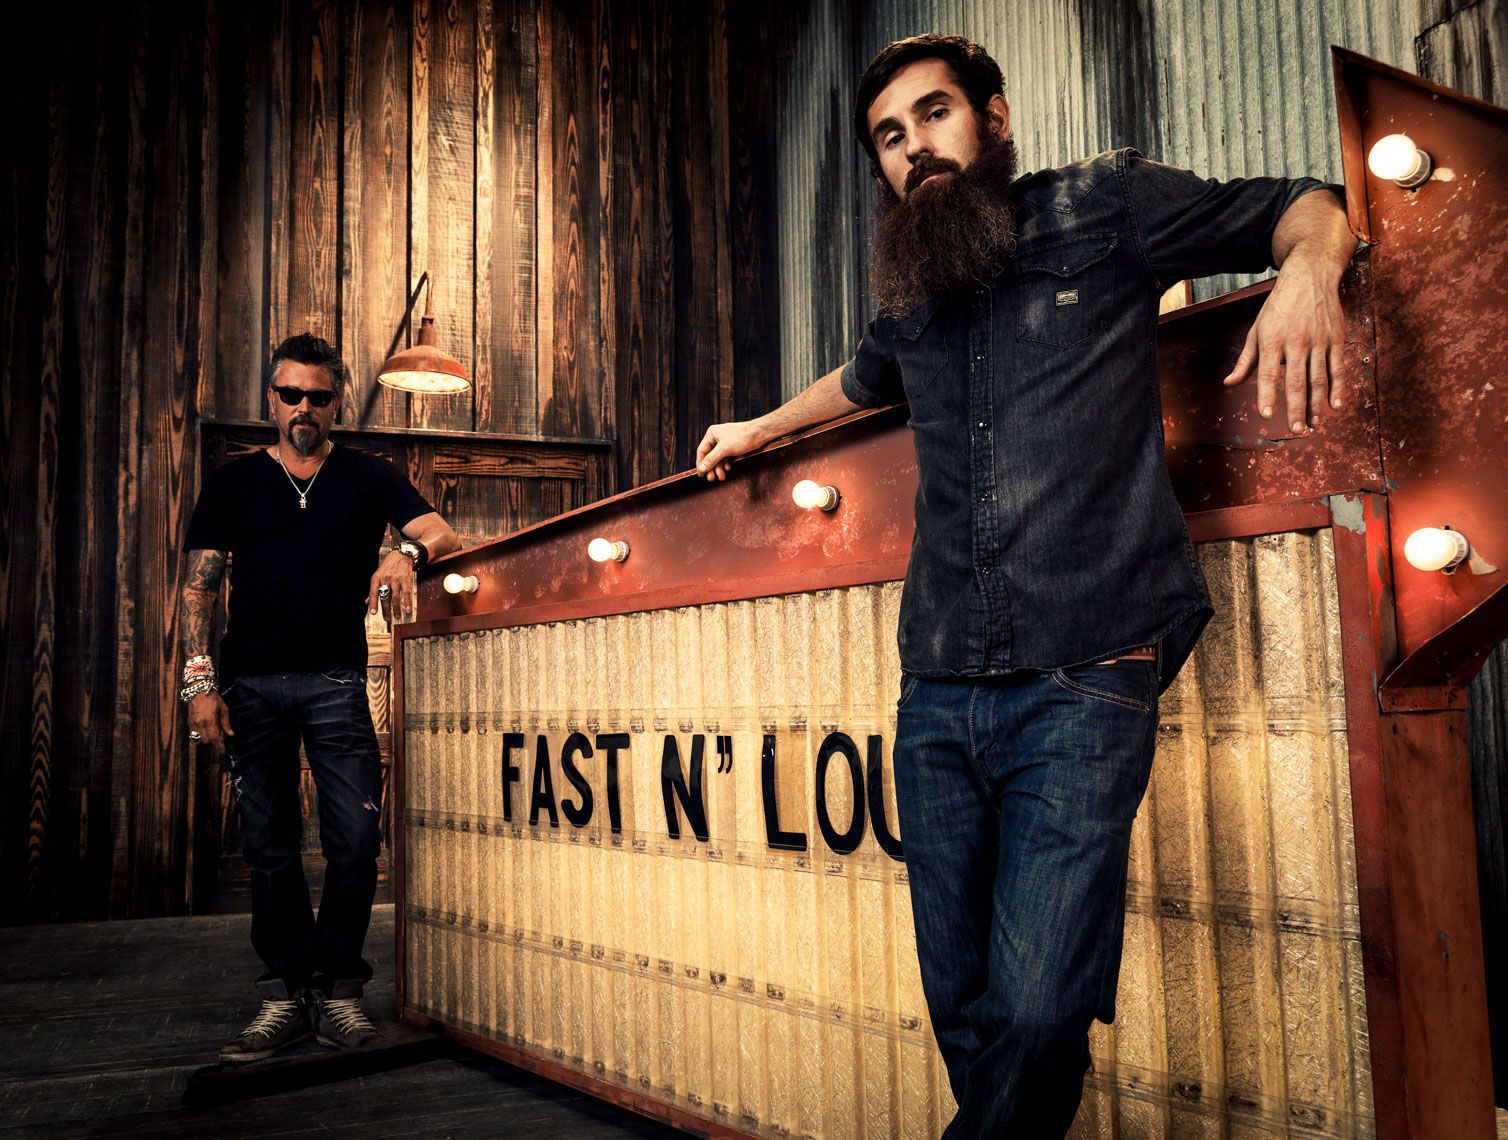 Fast n loud kaufman rawlings at the counter